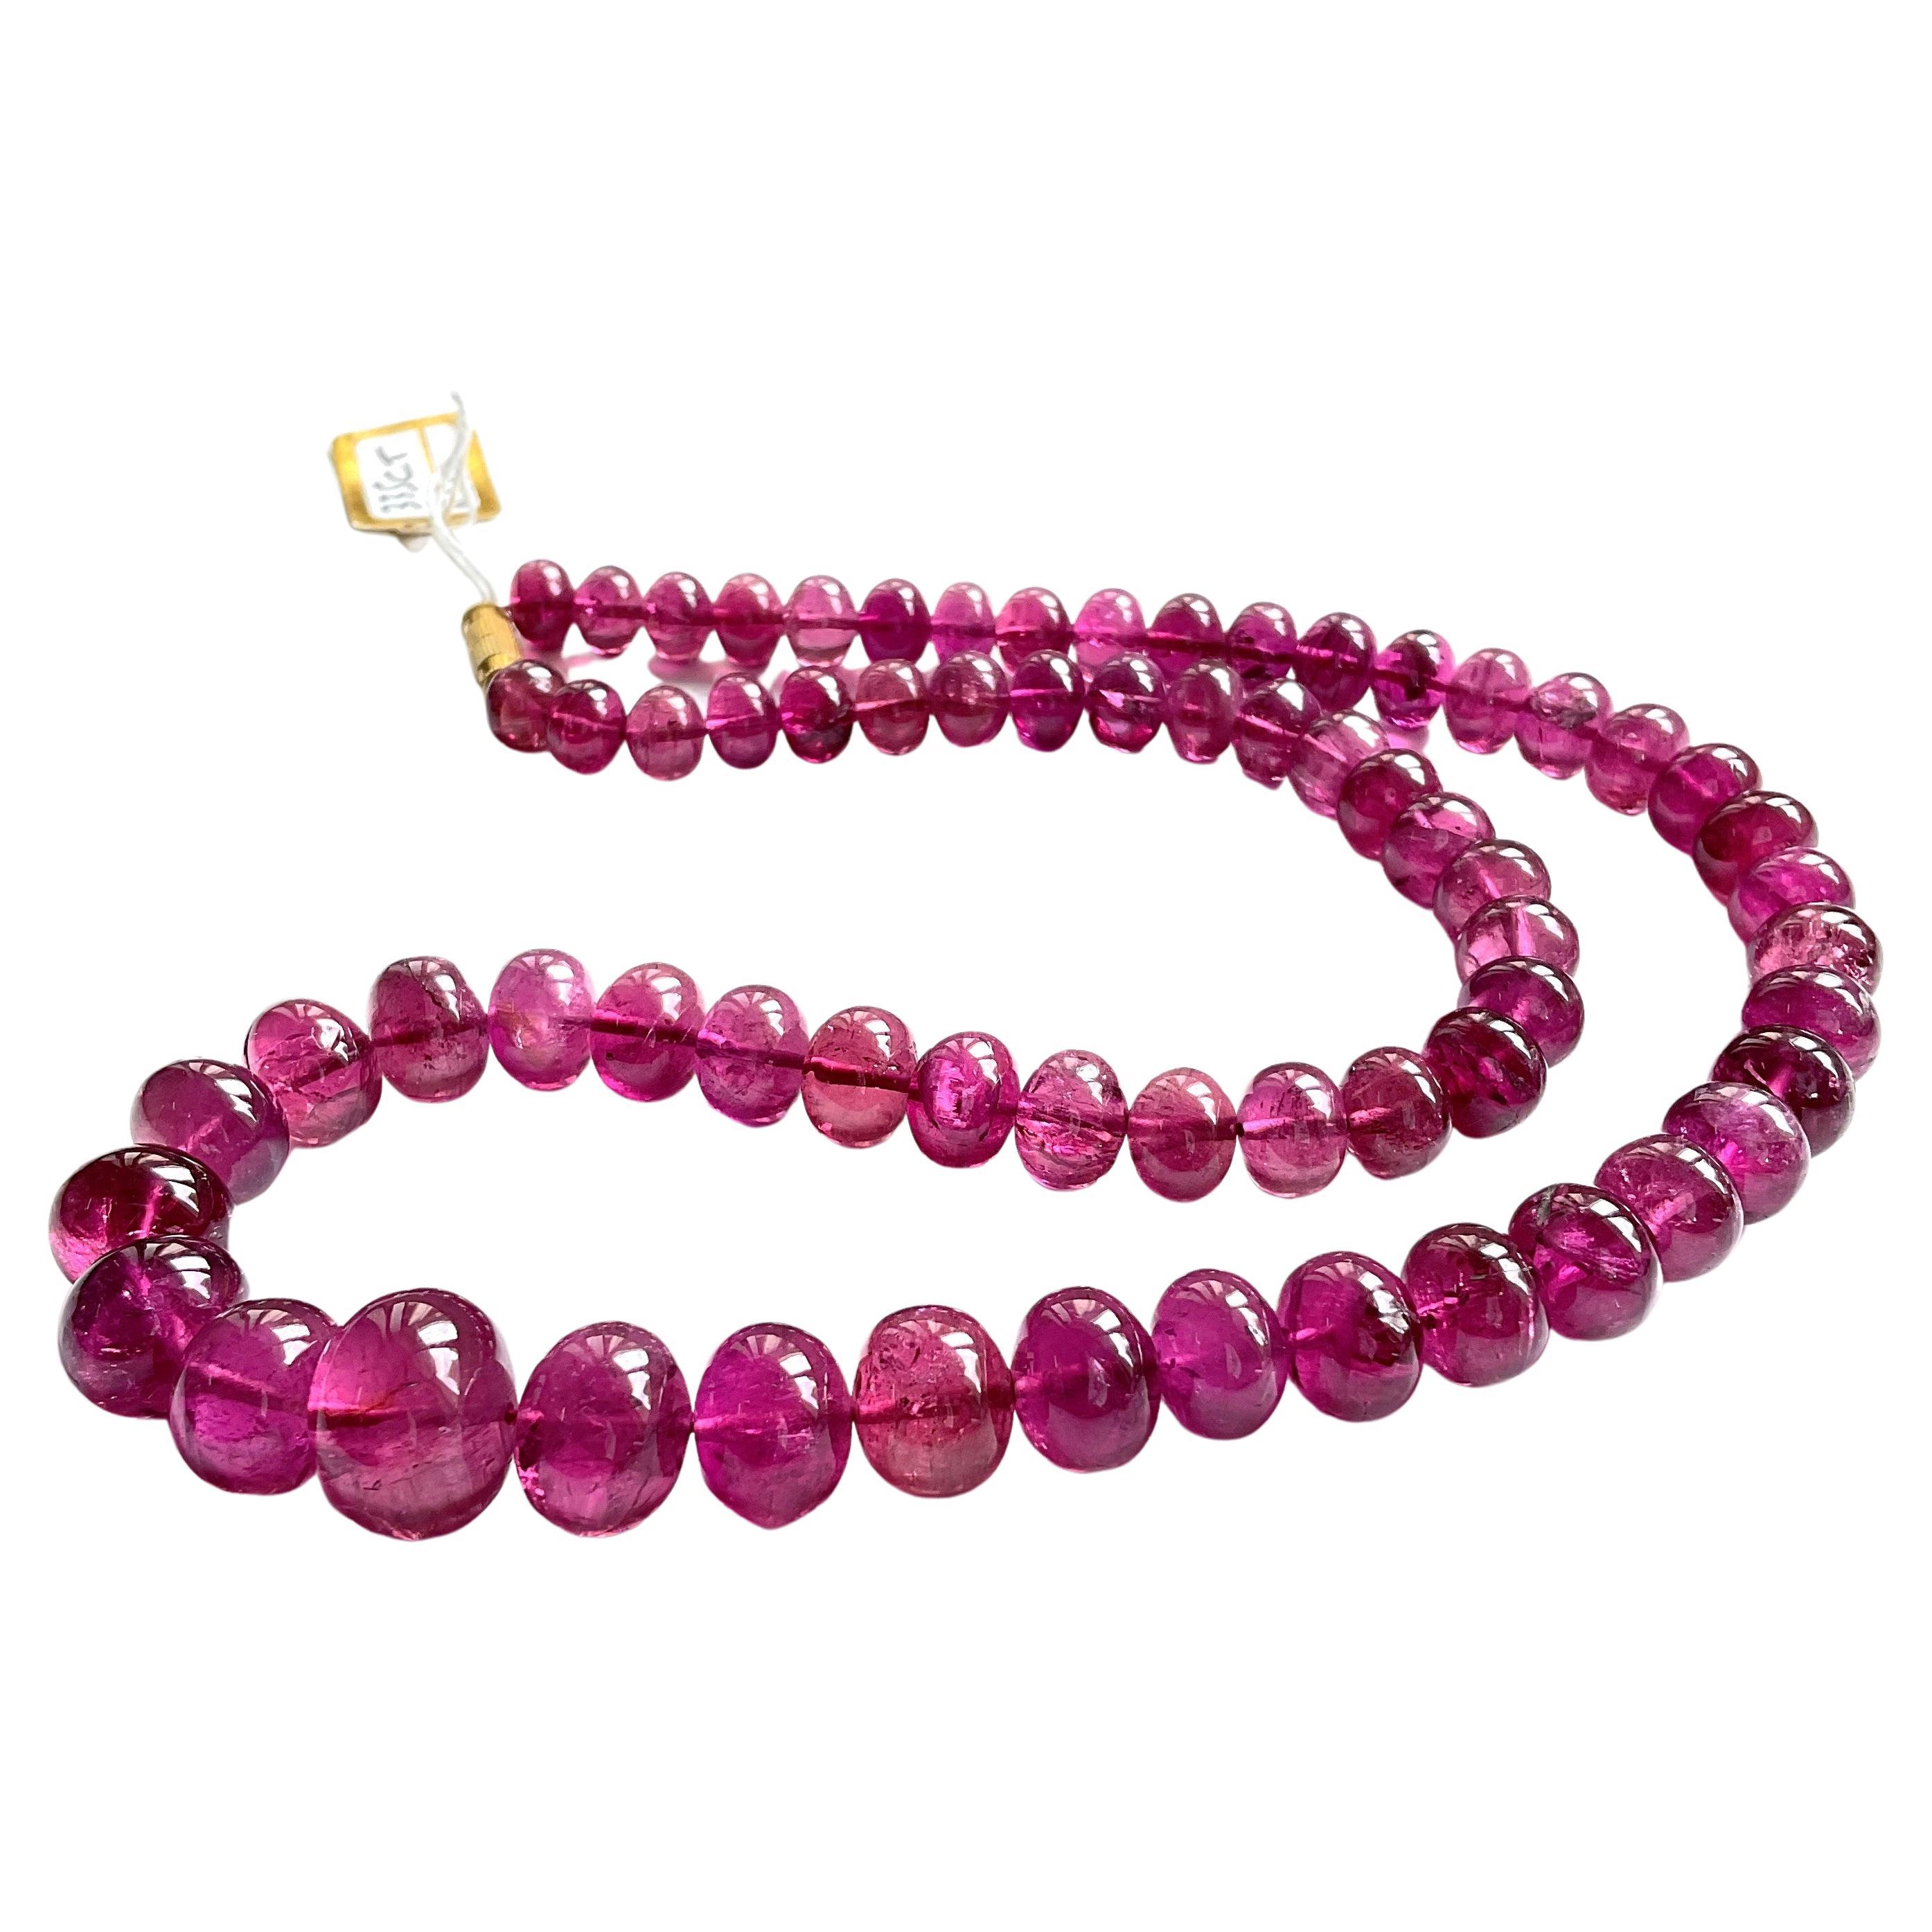 This is a one of a kind of rubellite tourmaline.
Gemstone - Rubellite Tourmaline
Weight - 335.01 Carats
Size - 7 To 14 MM
Strand - 1
Shape -Beads
